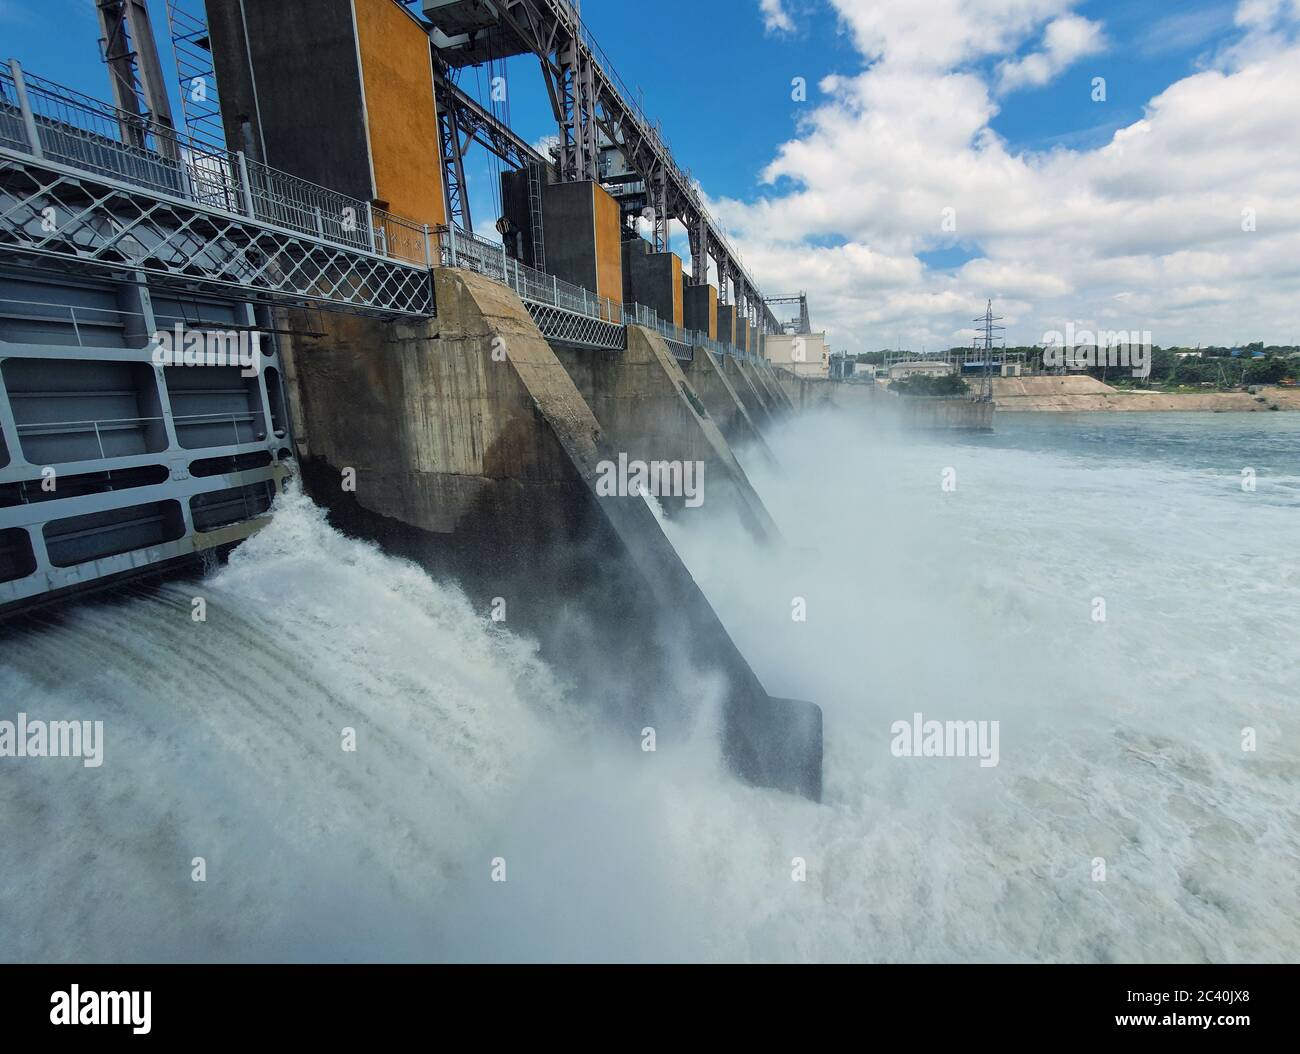 Hydropower Plant on the Nistru river in Dubasari (Dubossary), Transnistria, Moldova. Hydro power station, water dam, renewable electric energy source, Stock Photo